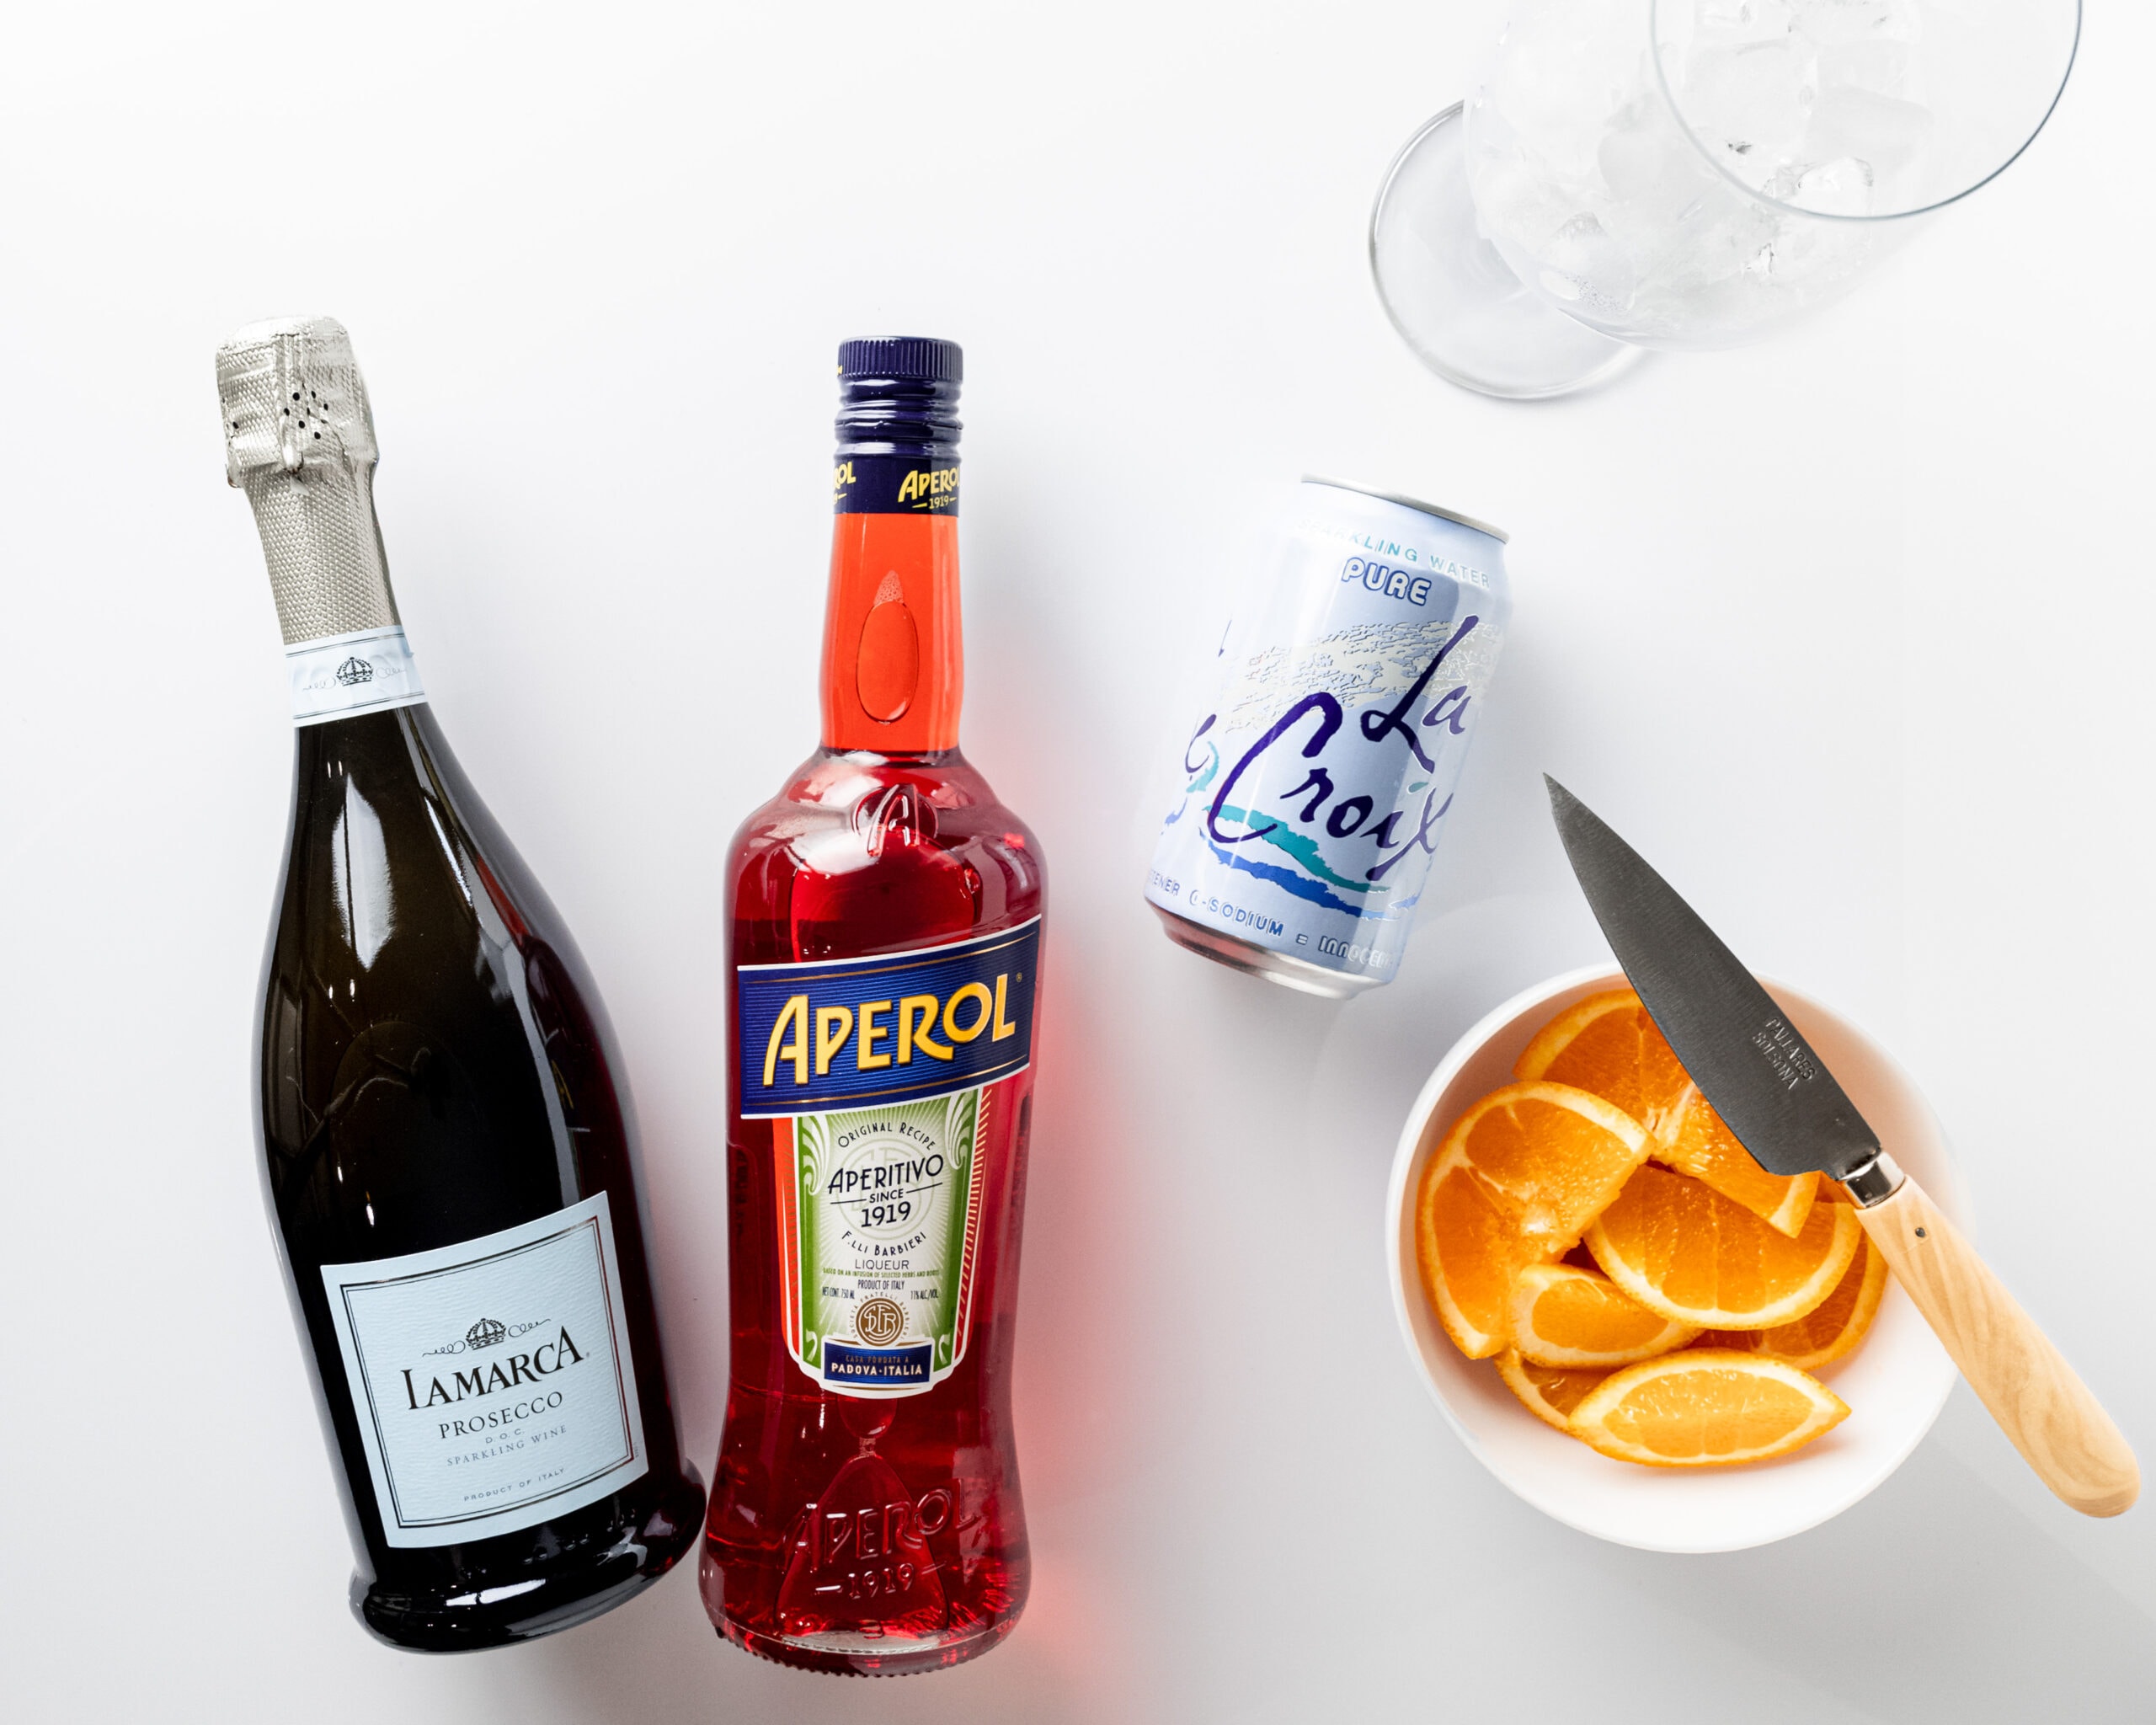 Ingredient shot of aperol spritz. One bottle of Lamarca prosecco, bottle of Aperol, can of sparkling water, a bowl of sliced oranges with a paring knife, and a white wine glass with ice.